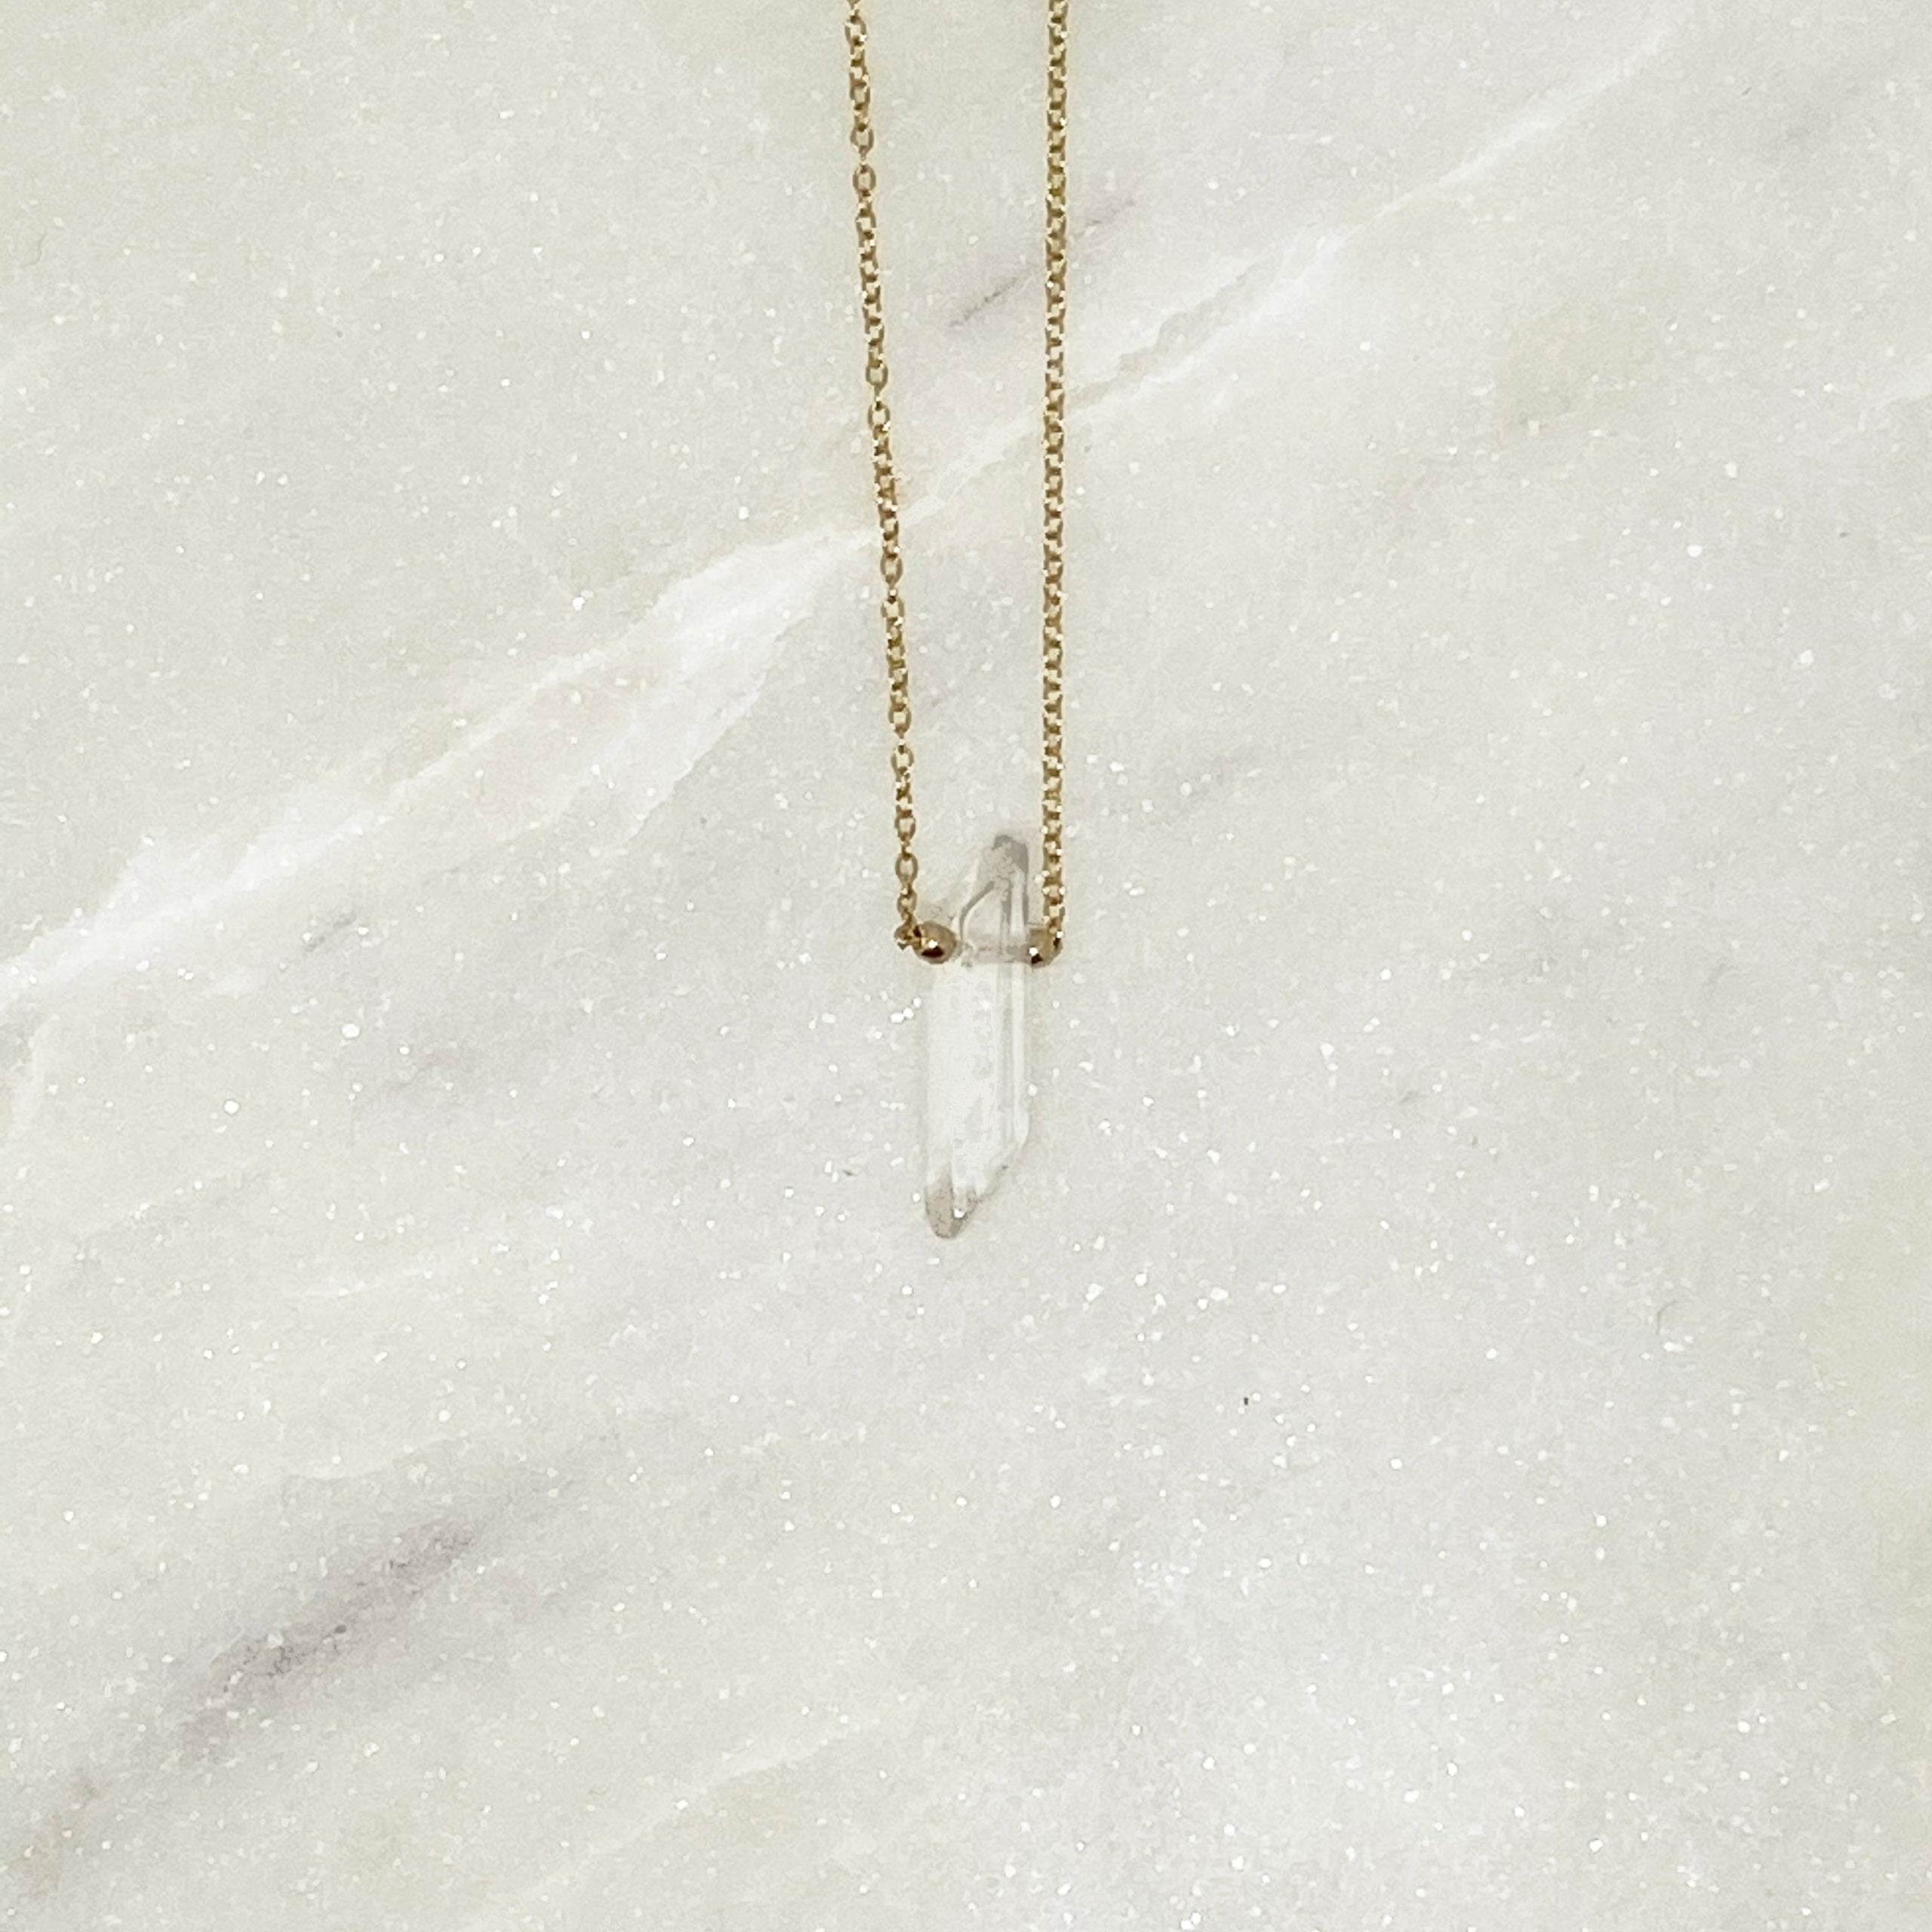 Step by Step Guide: How To Make Crystal String Necklaces